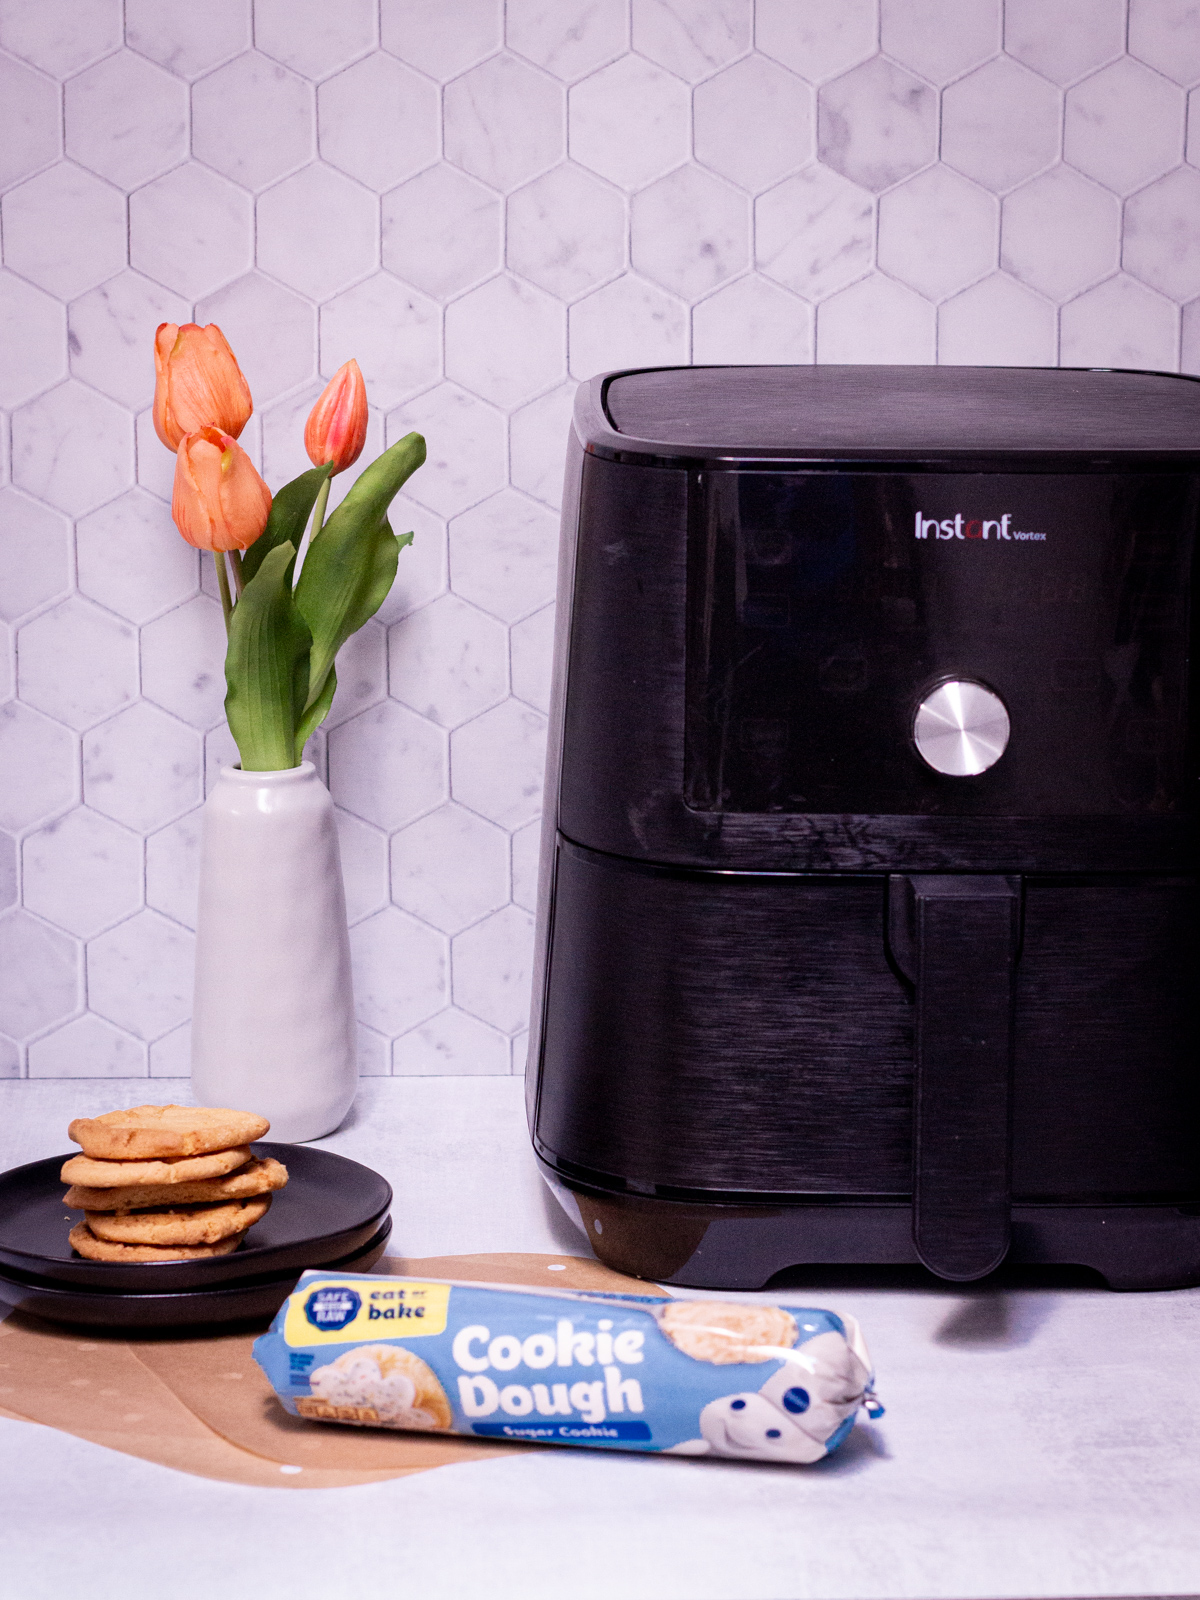 air fryer with roll of cookie dough and plate of baked cookies